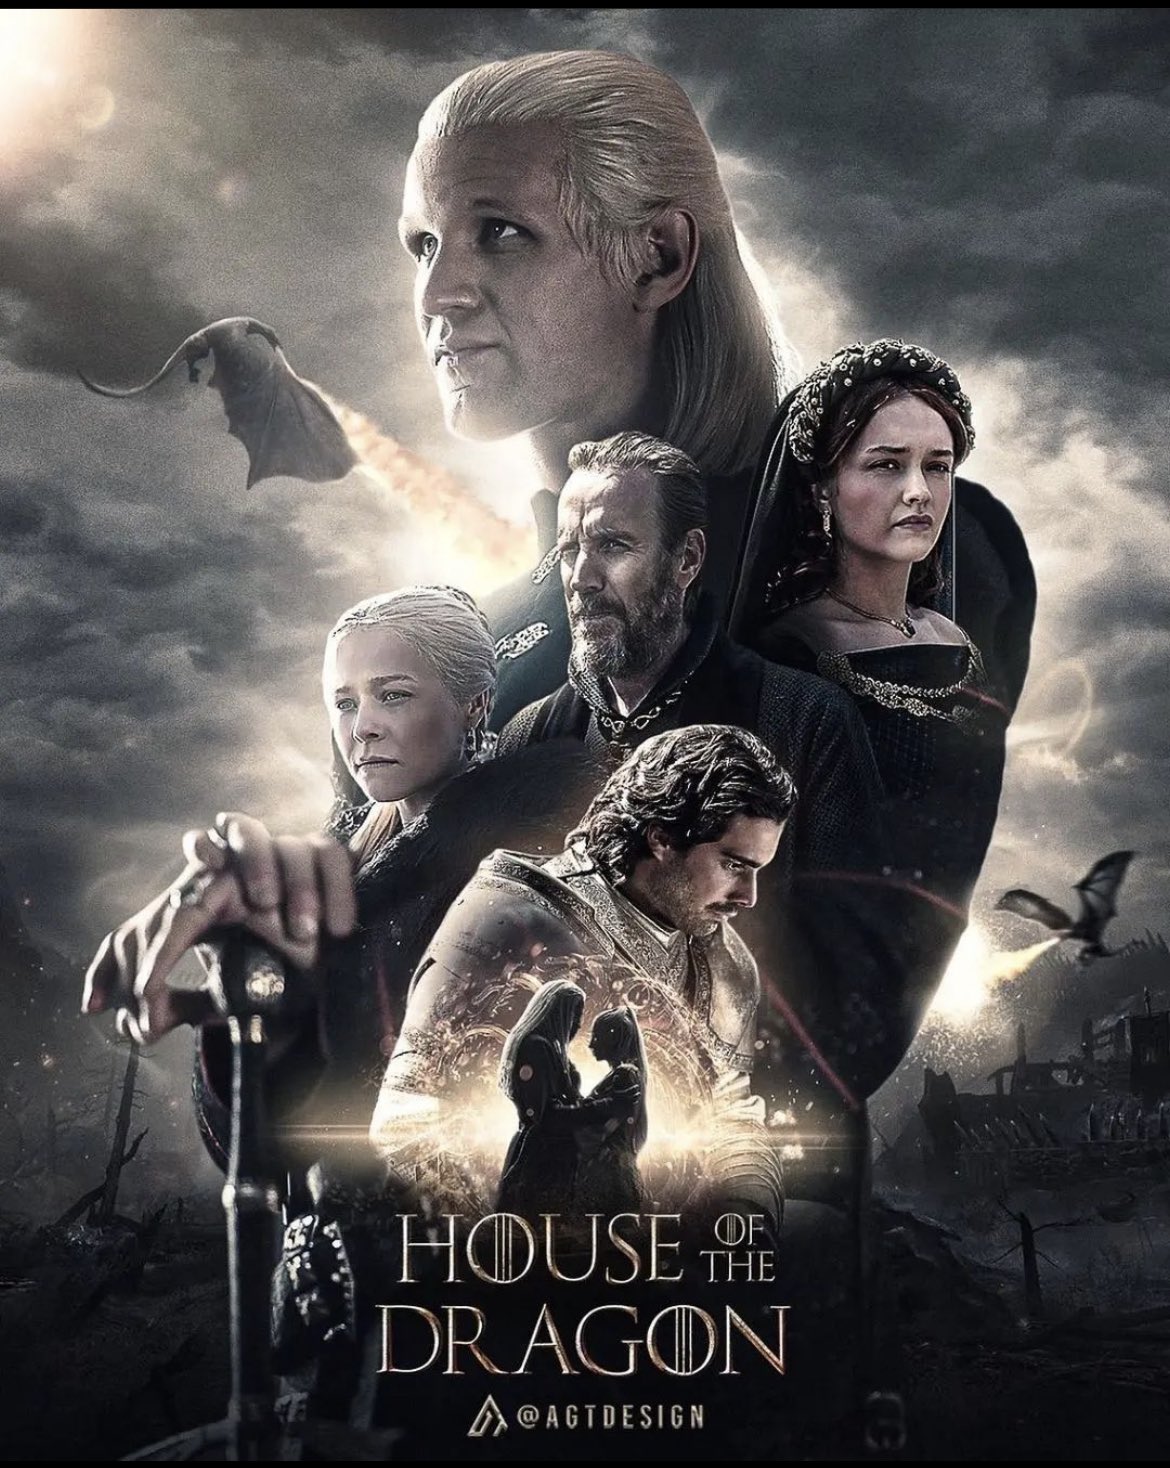 House Of The Dragon 2022 S01E10 English 720p HDRip 600MB Download